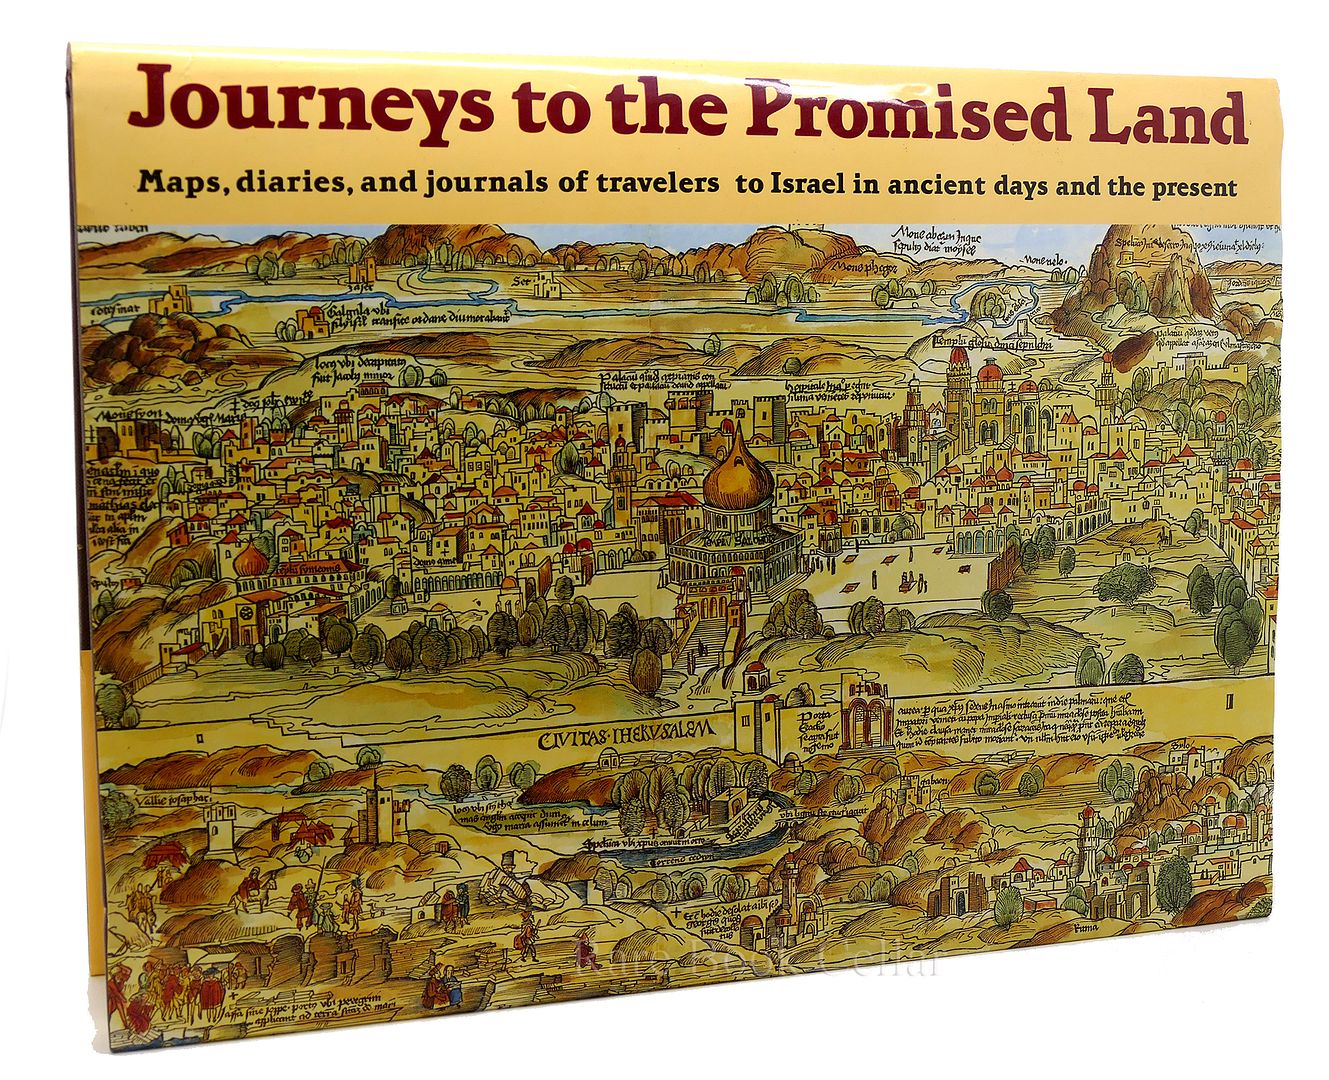 RAN, NACHMAN - Journeys to Promised Land Maps, Diaries and Journals of Travelers to Israel in Ancient Days and the Present